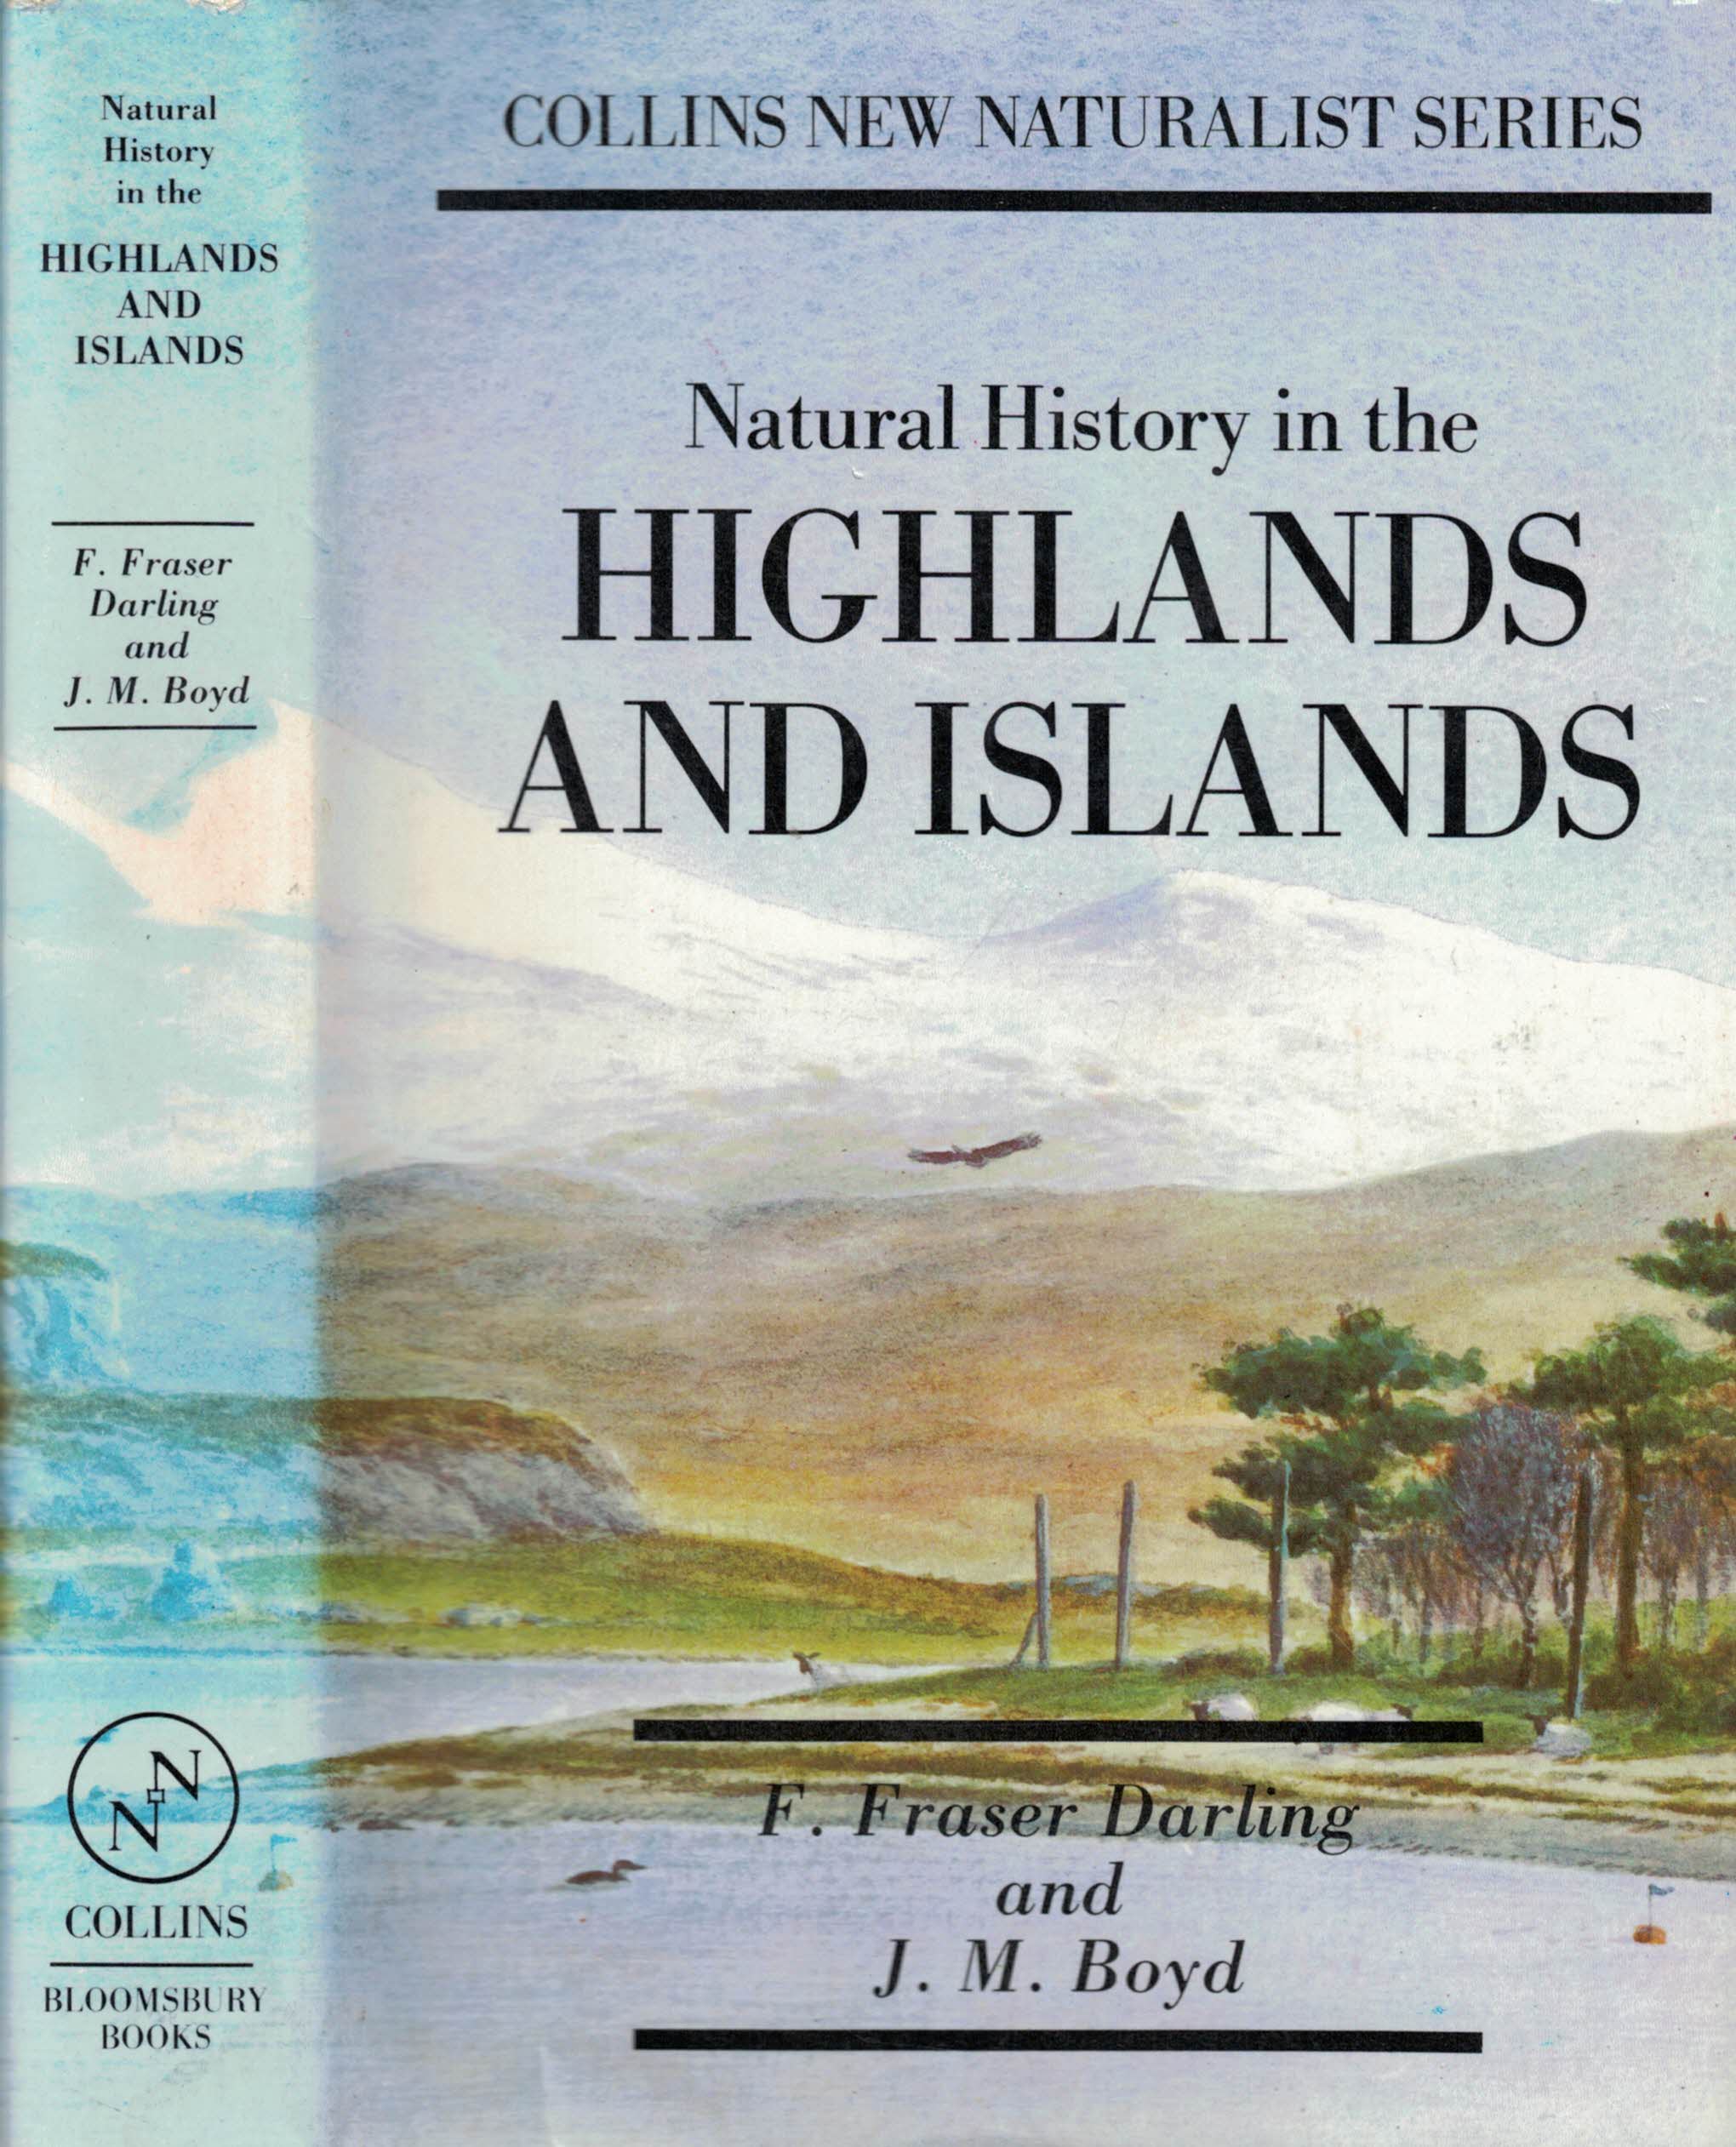 Natural History in the Highland and Islands. New Naturalist No 6. Bloomsbury edition. 1989.